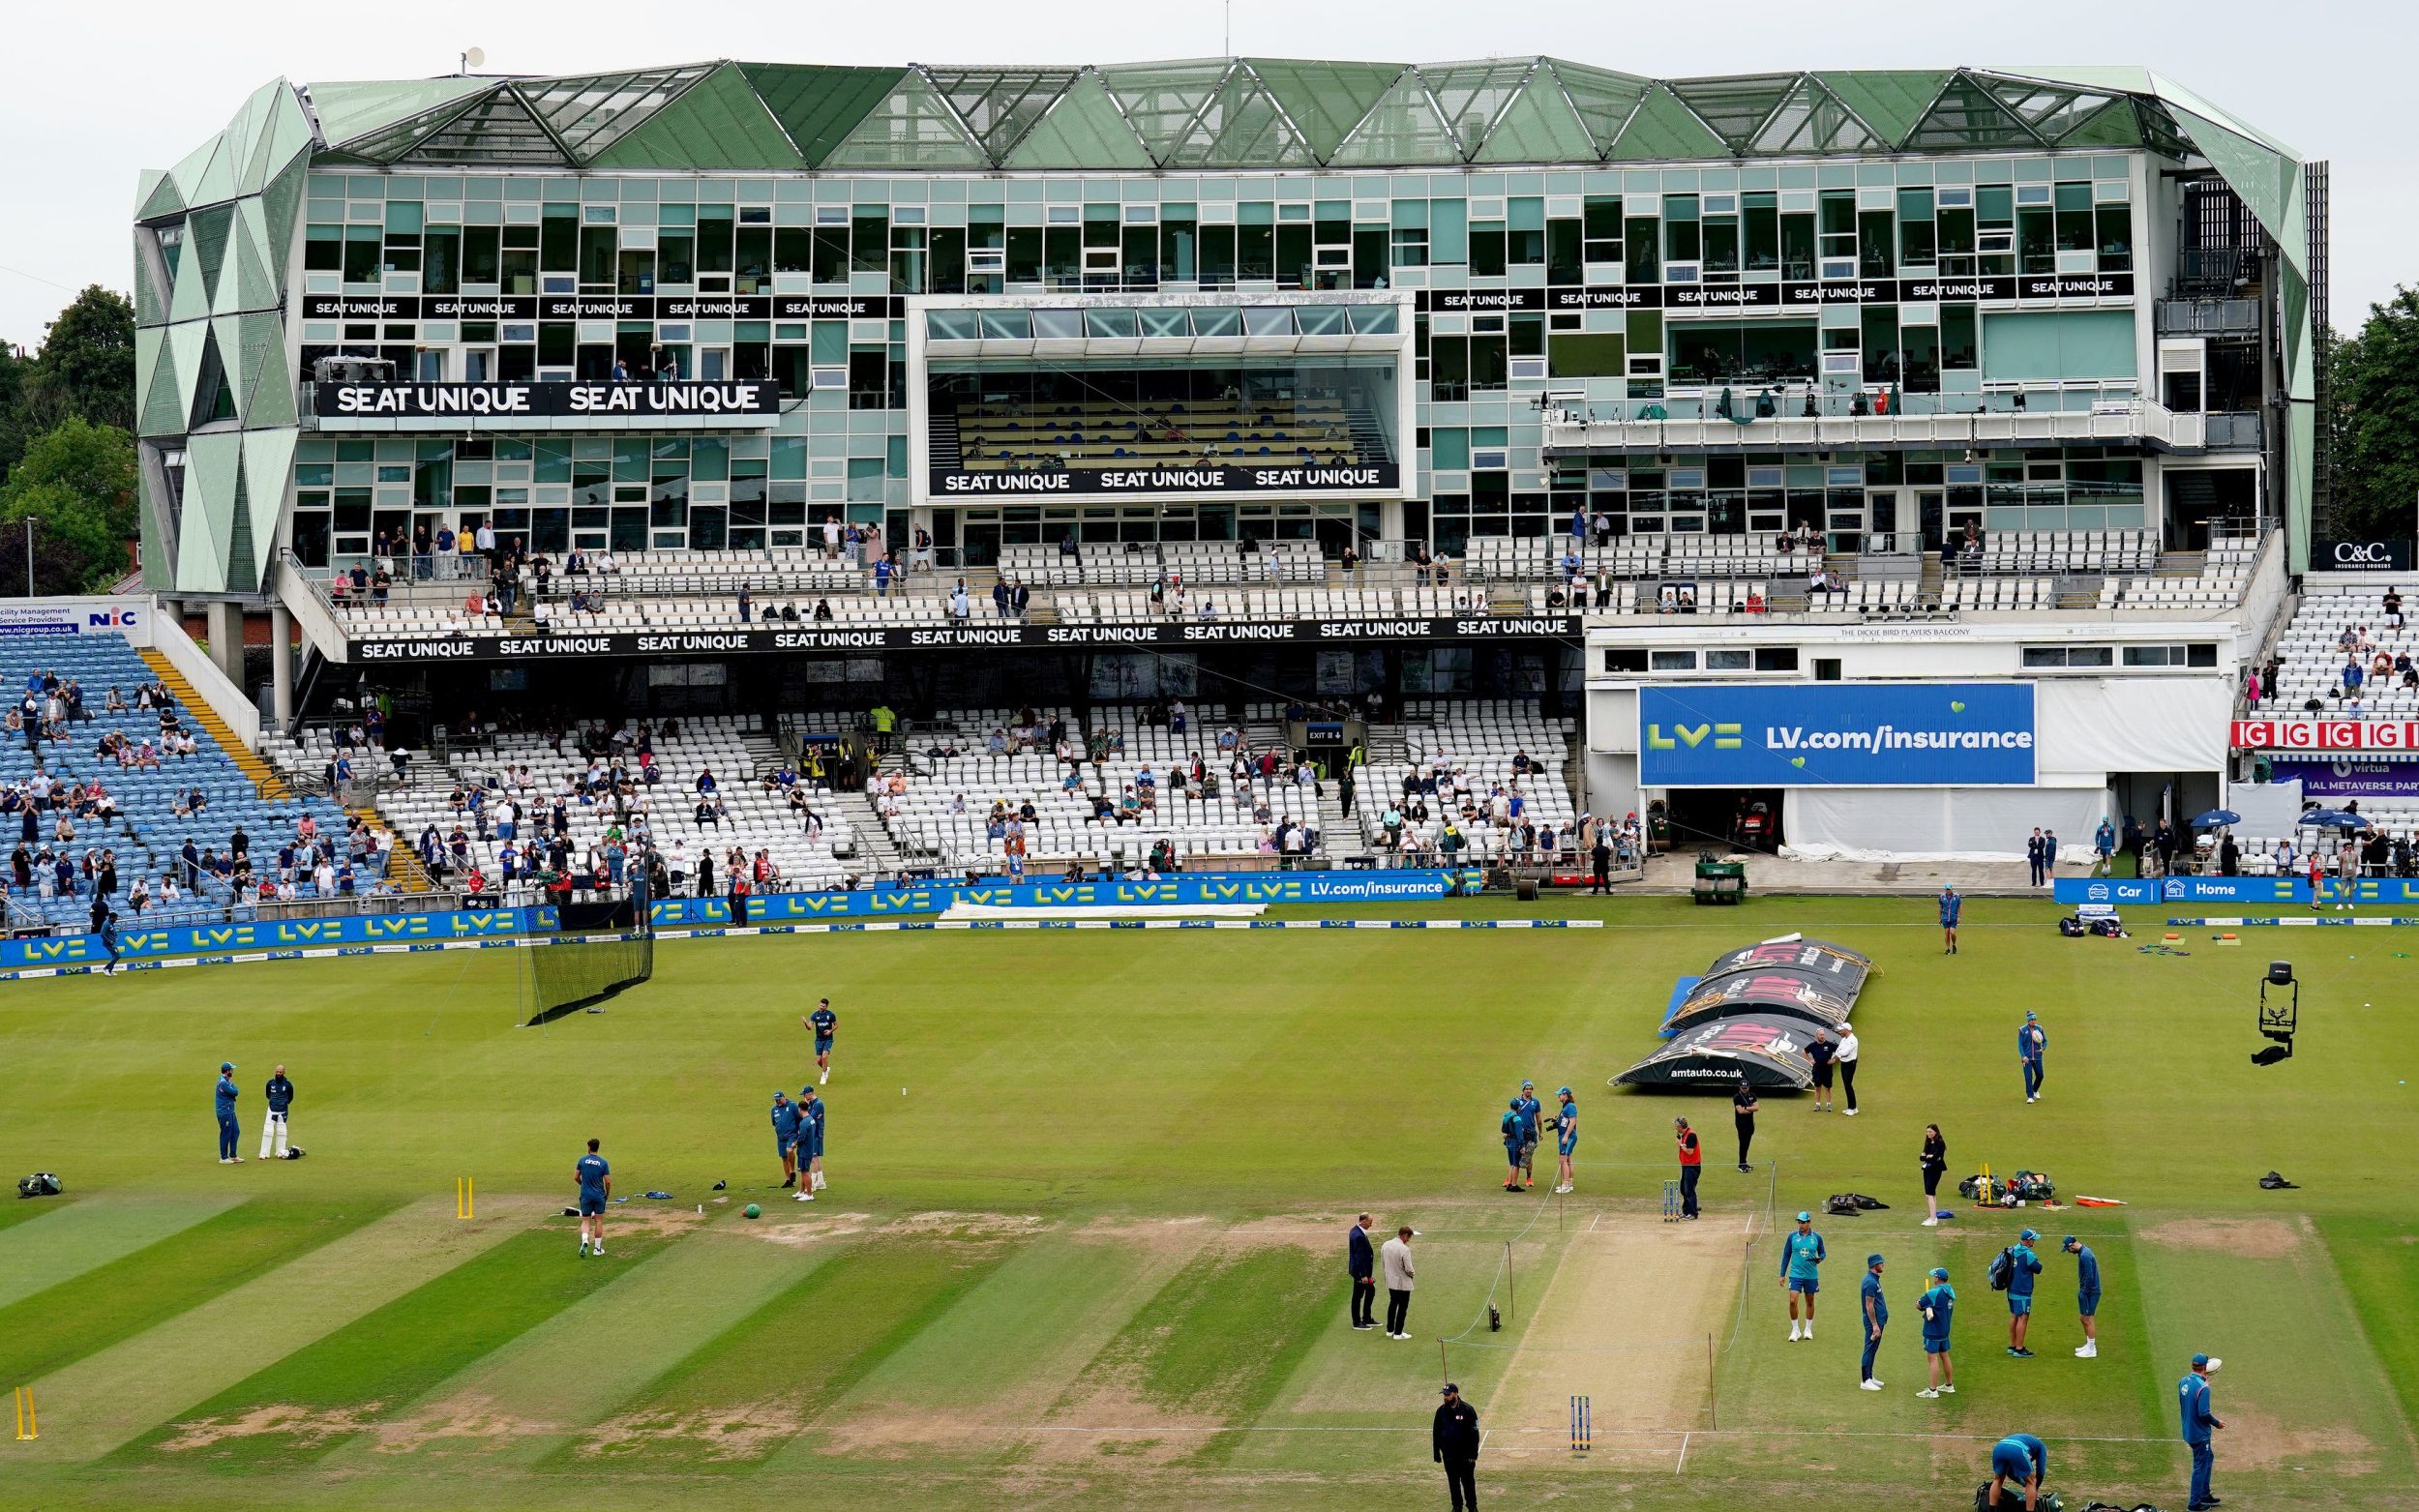 yorkshire snubbed by ecb over hosting ‘tier one’ women’s cricket side